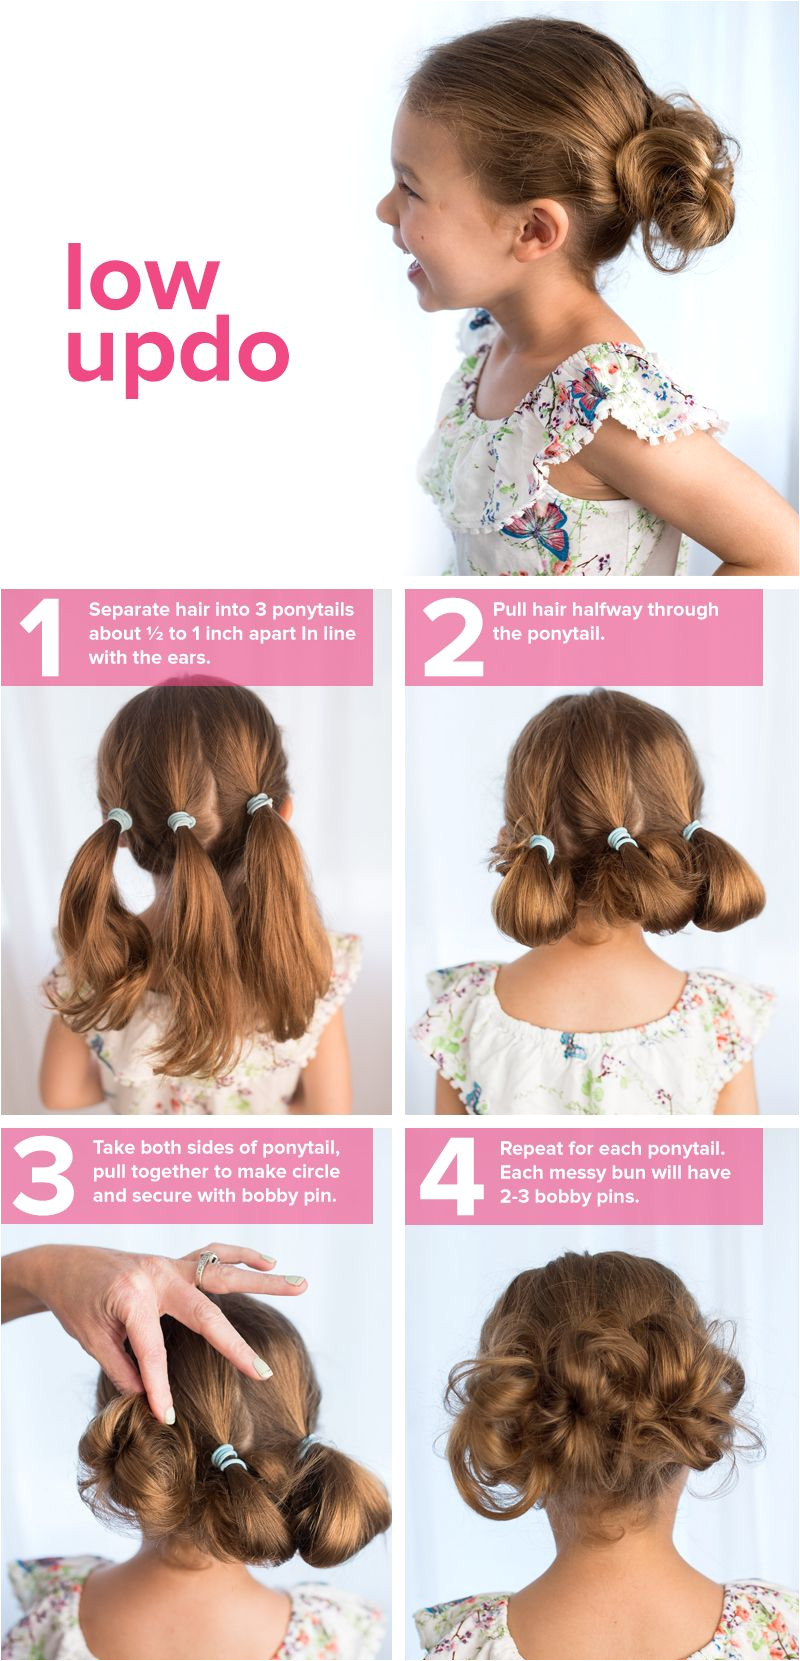 Simple Hairstyles Homemade 5 Fast Easy Cute Hairstyles for Girls Back to School